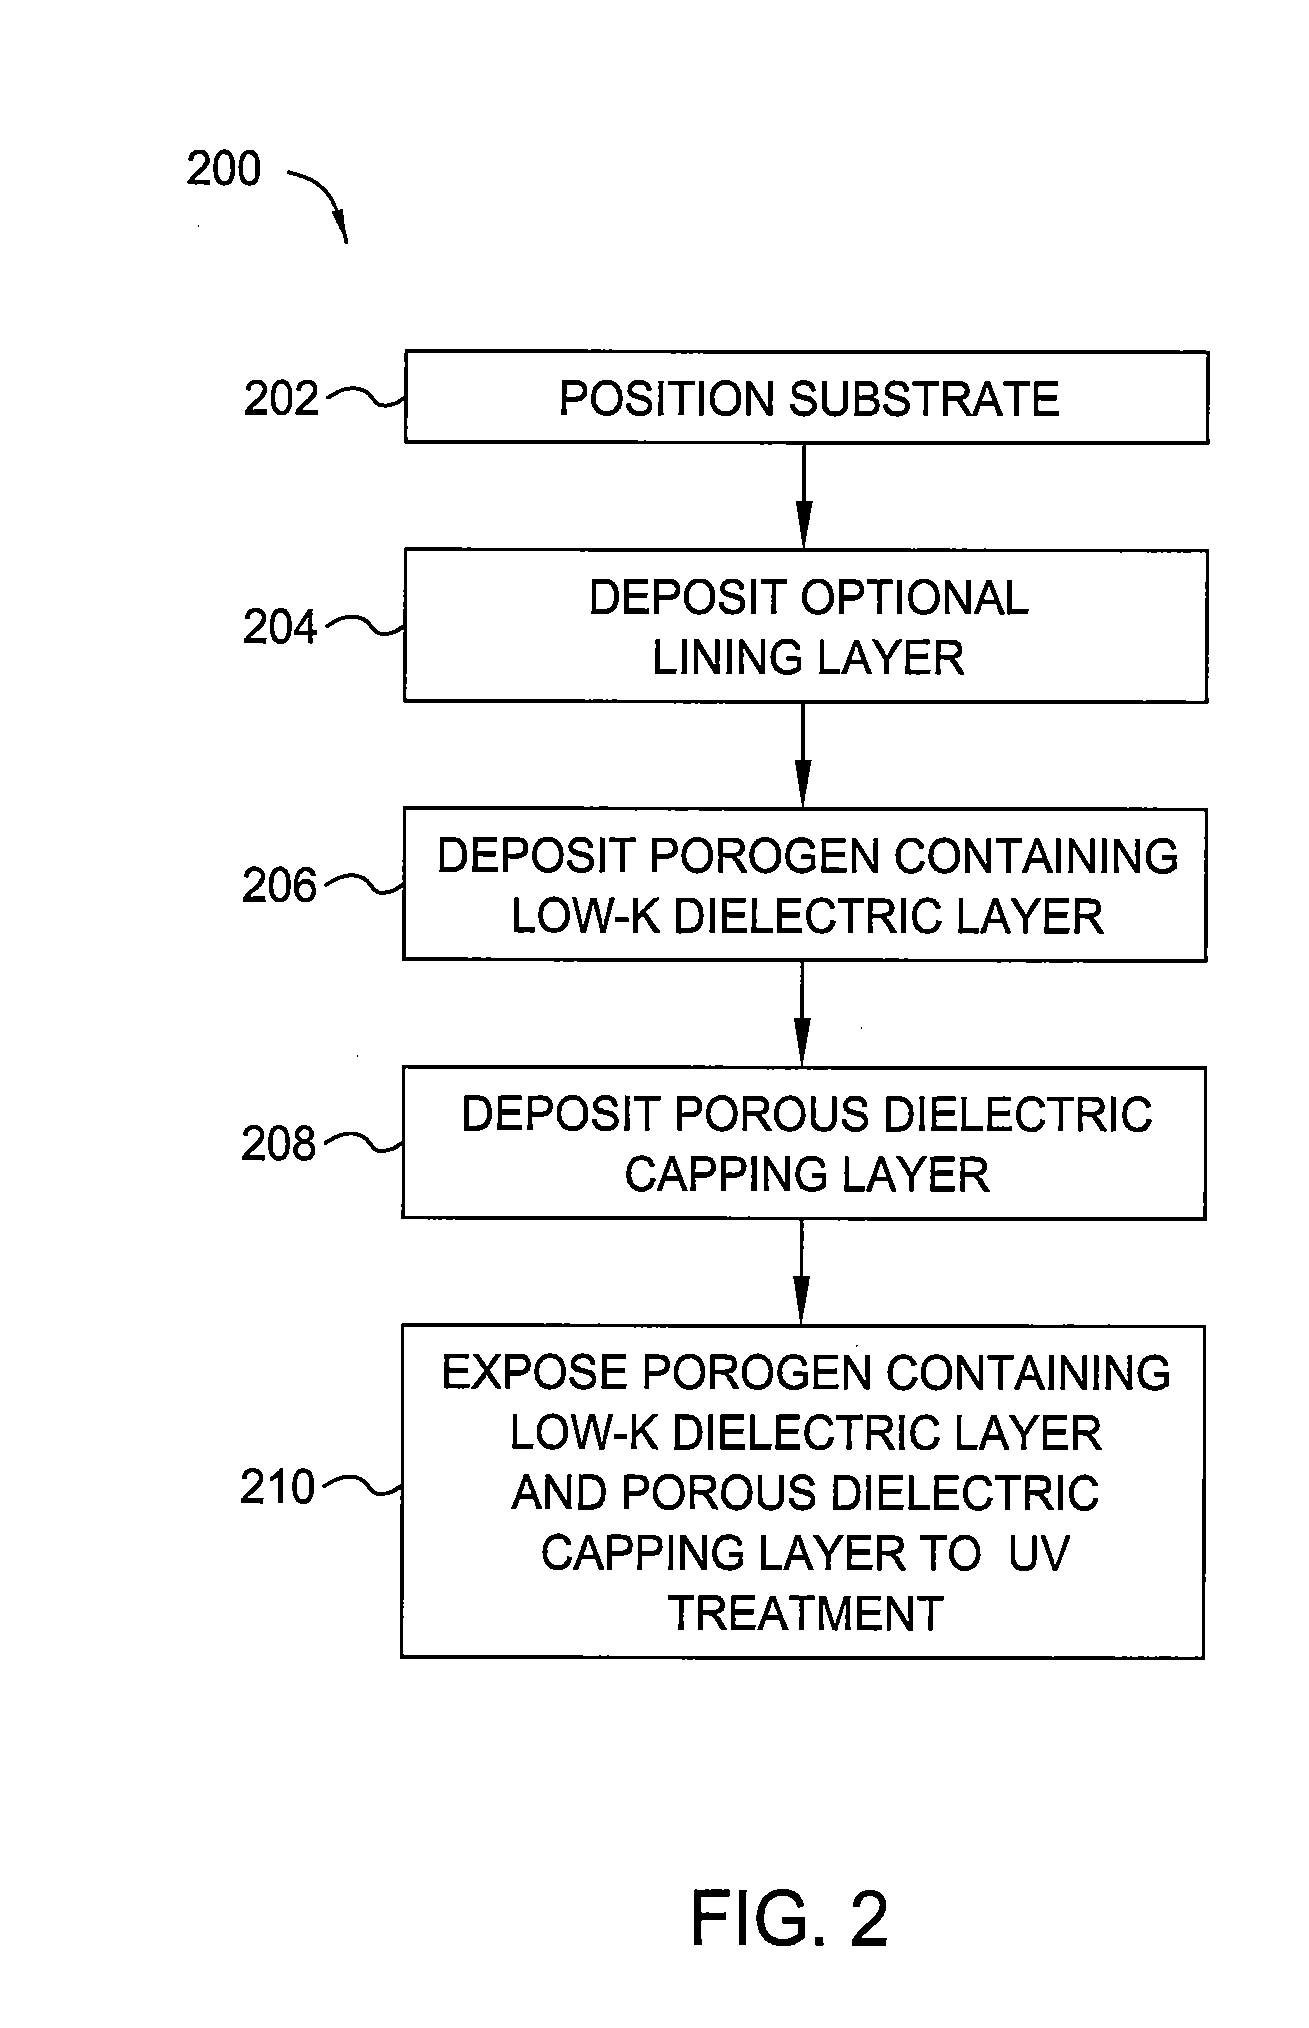 In-situ low-k capping to improve integration damage resistance